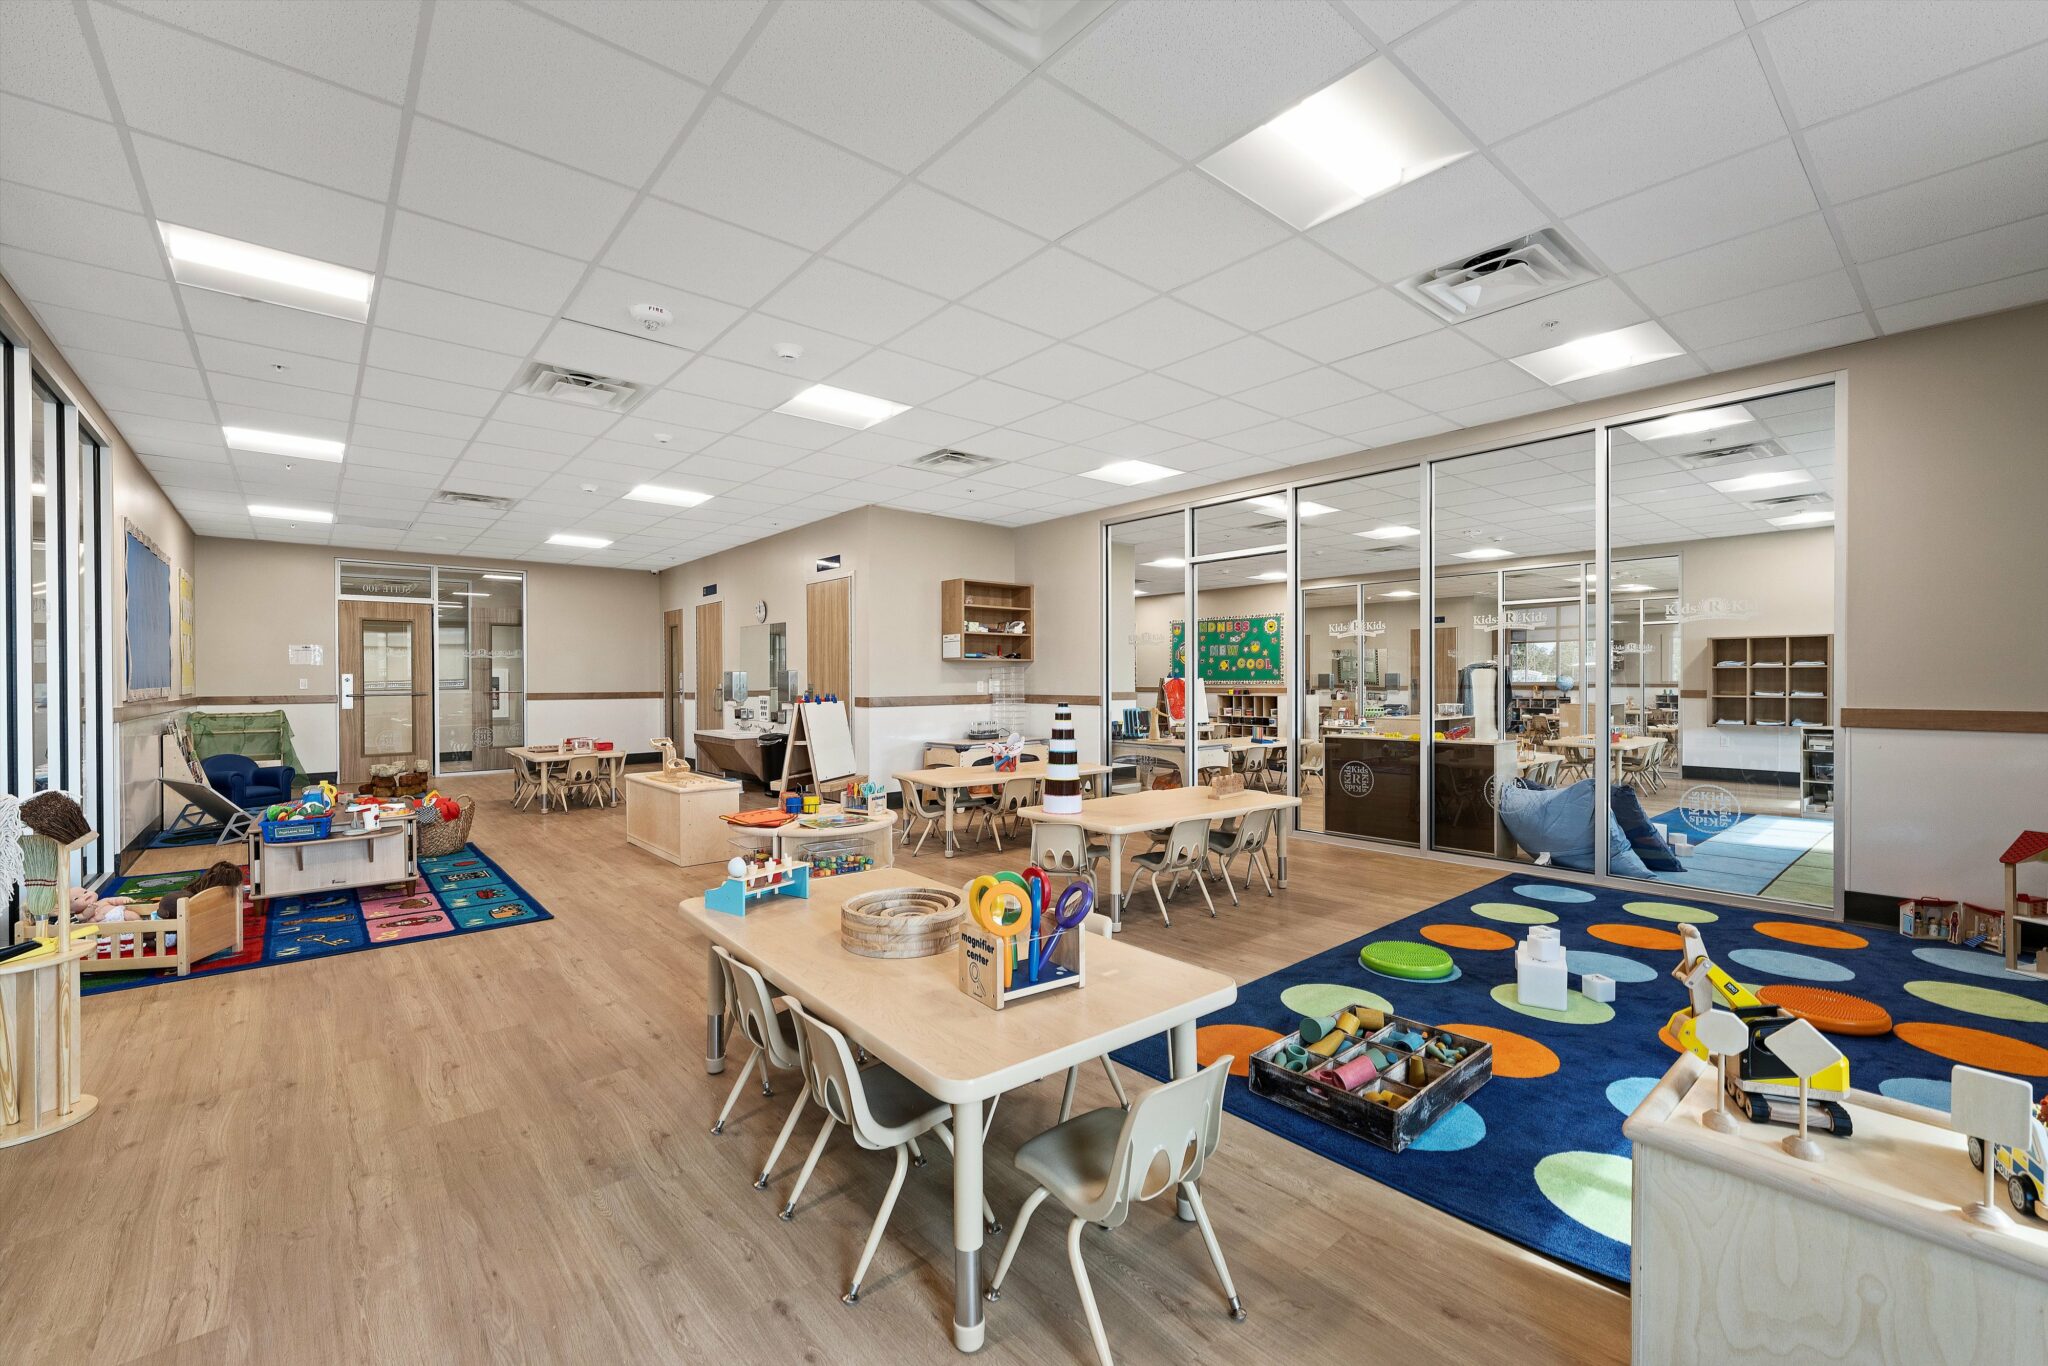 Built Wright Construction Waco, Texas - Kids R Kids Learning Academy of Woodway 1